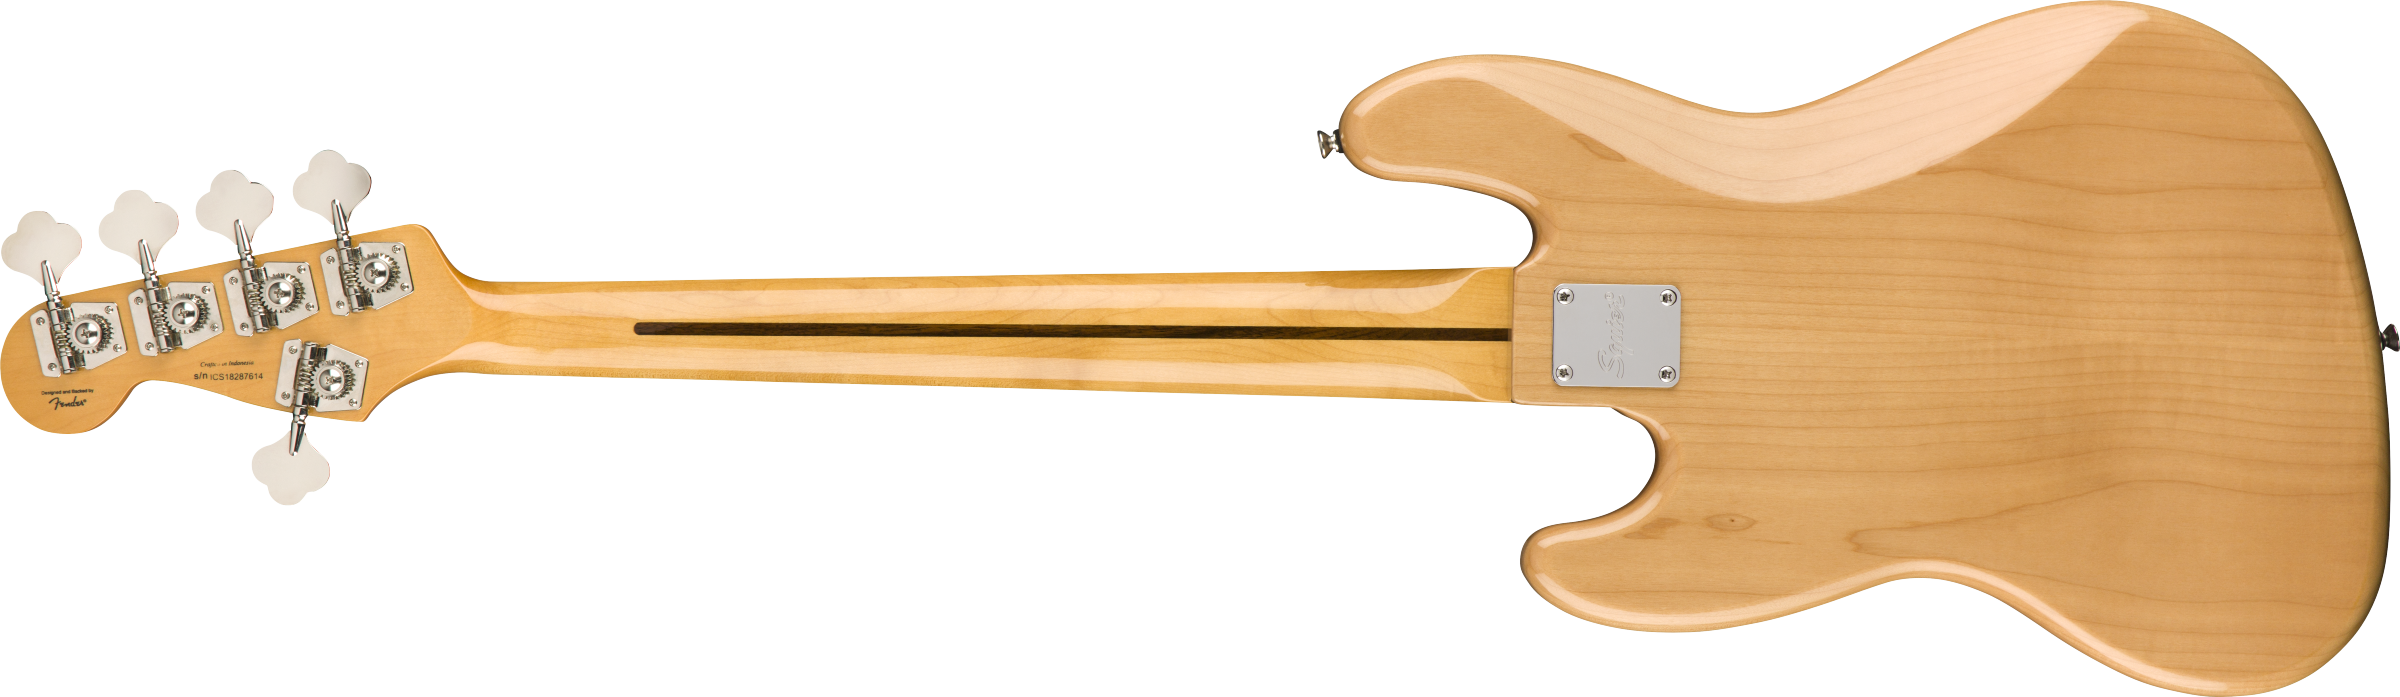 Classic Vibe '70s Jazz Bass® V, Maple Fingerboard, Natural